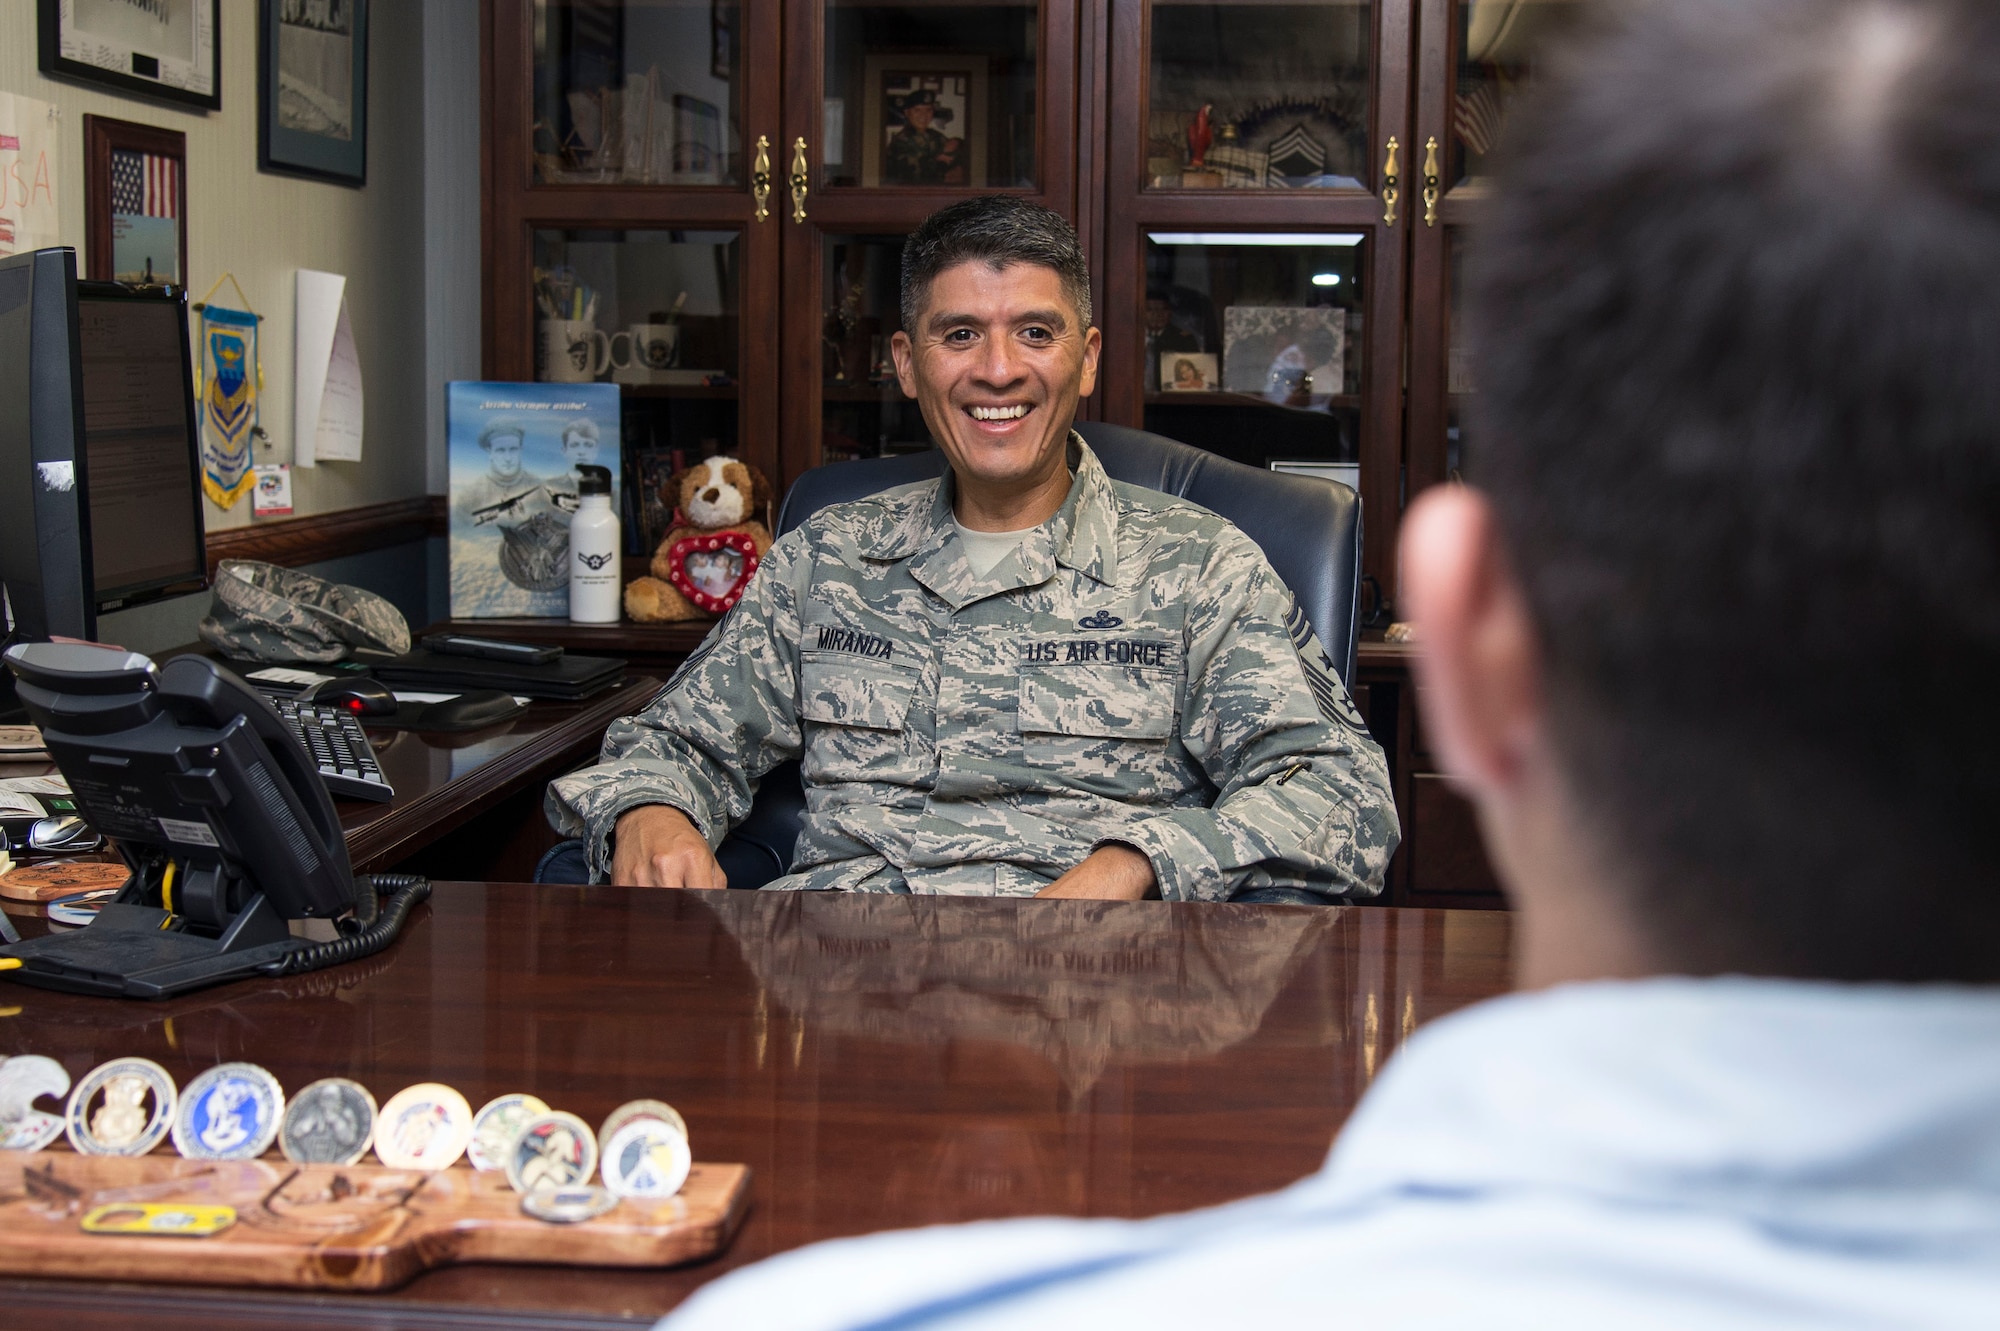 Command Chief Benjamin Miranda Jr., 635th Supply Chain Operations Wing, takes a moment to mentor an Airman. Photo by Airman 1st Class Melissa Estevez